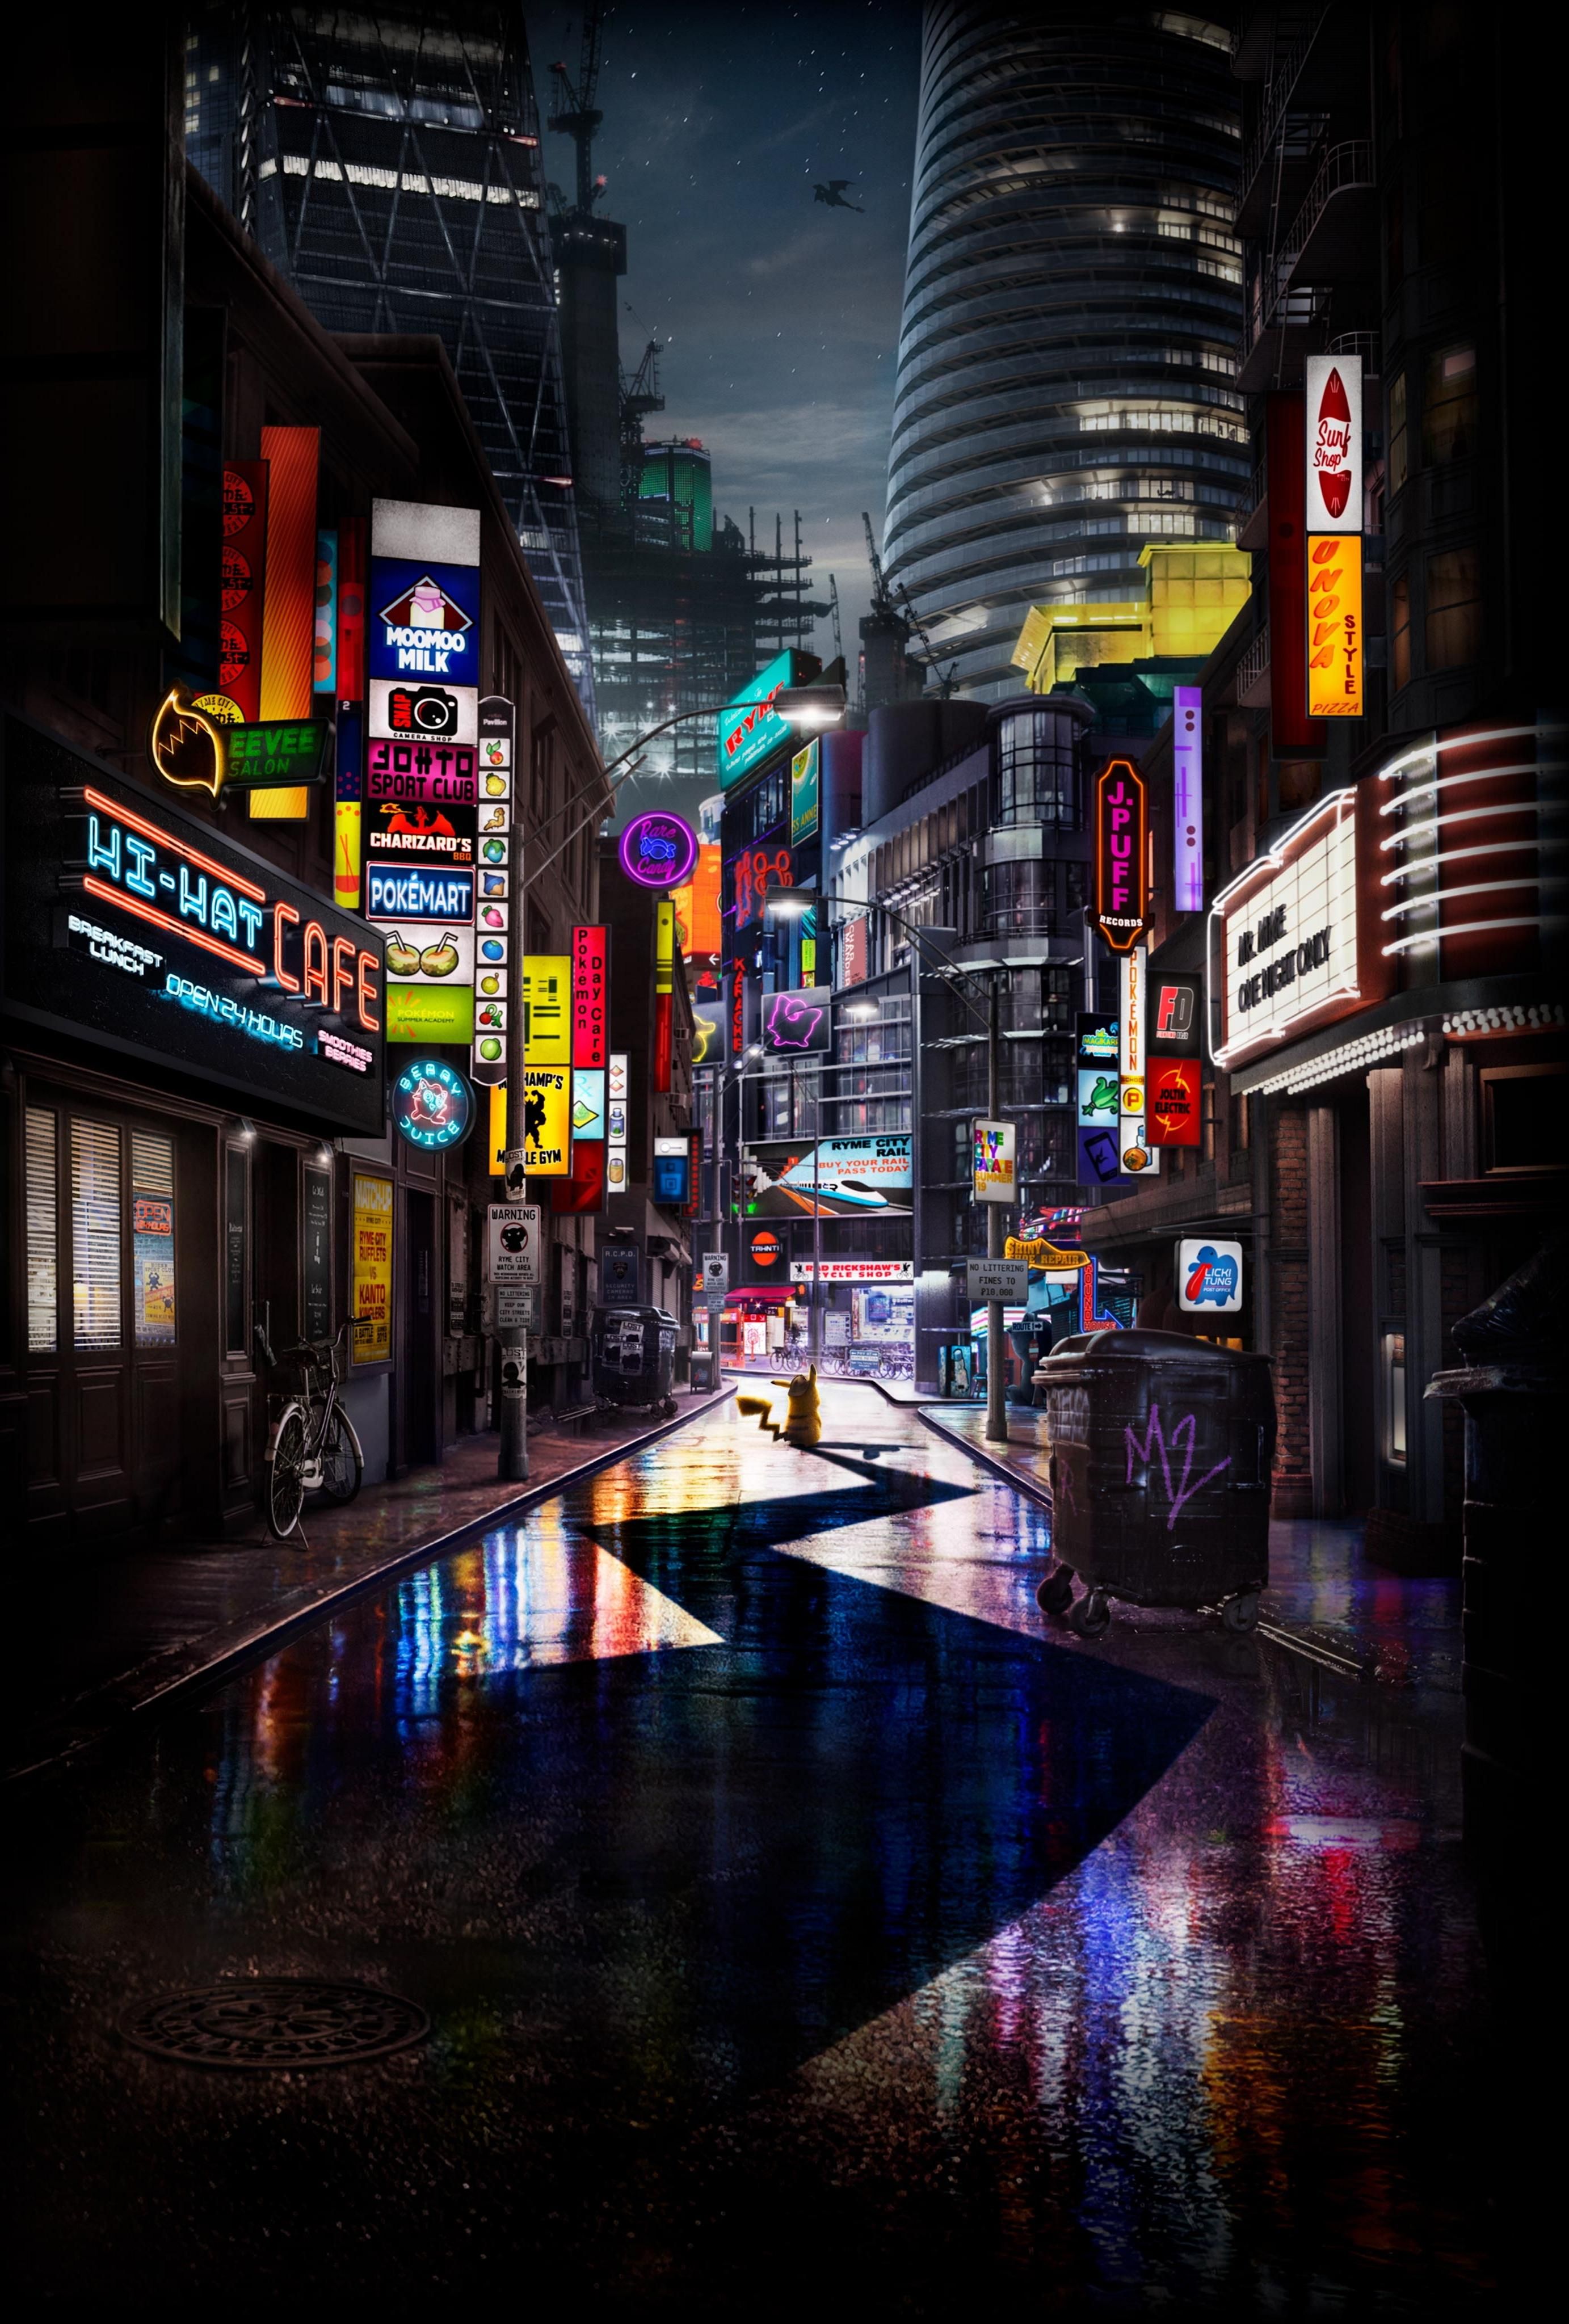 Detective Pikachu Textless Poster [2765 x 4096]. Cityscapes